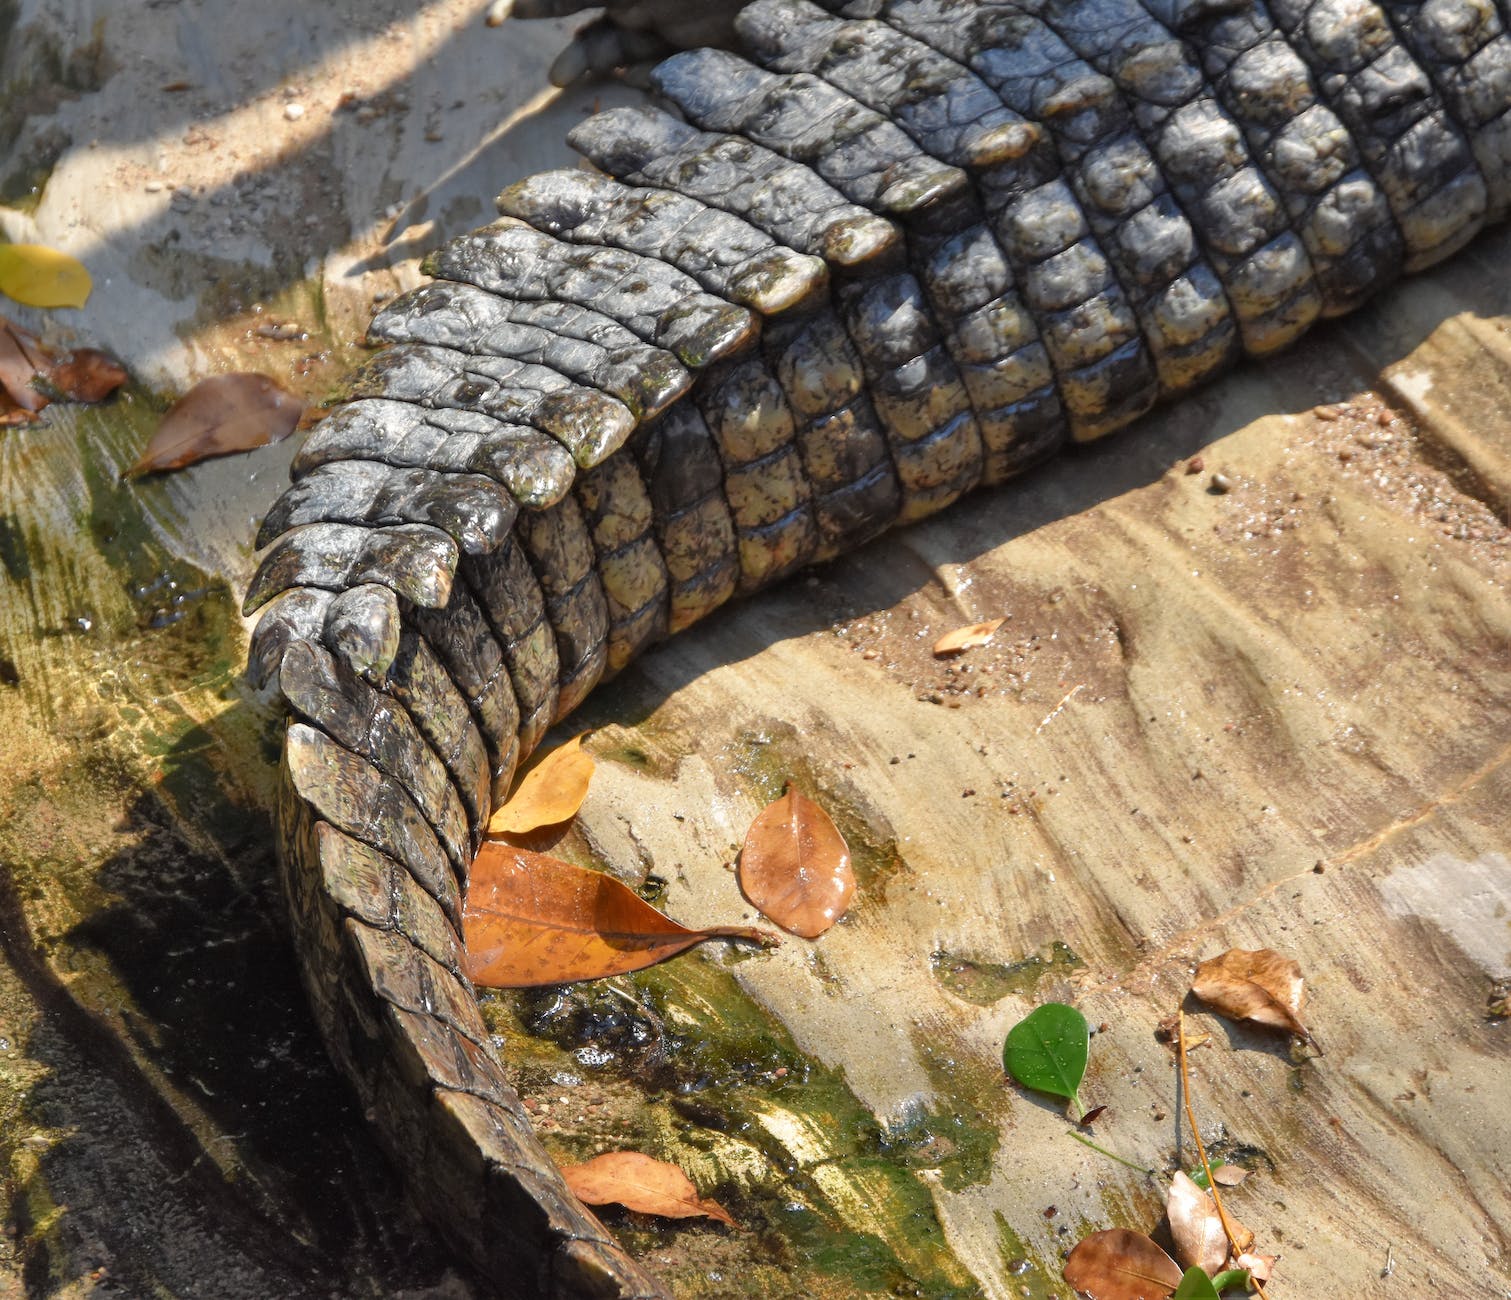 scaly tail of a crocodile